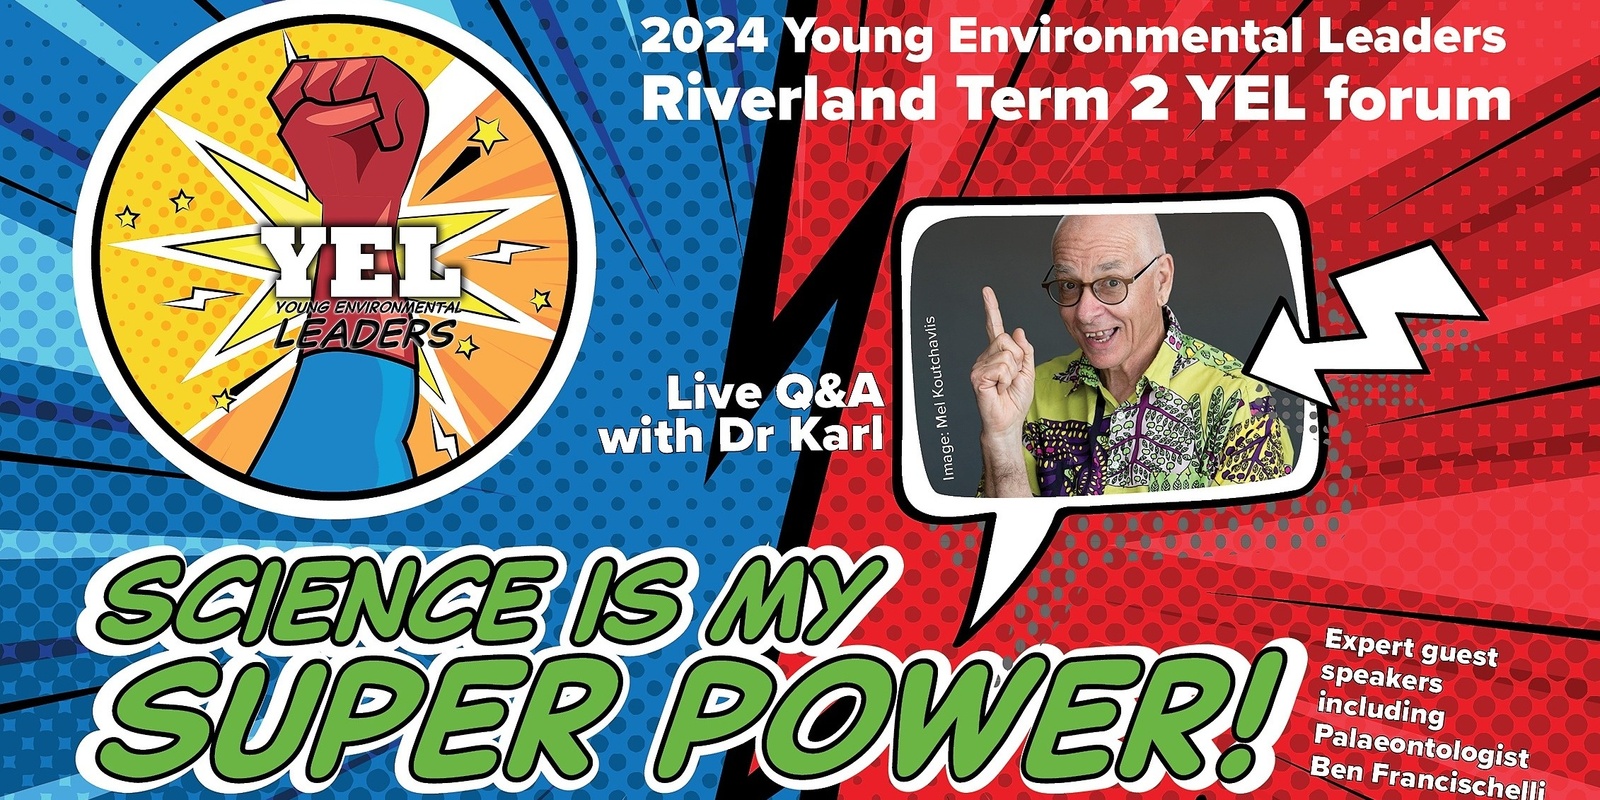 Banner image for RIVERLAND Term 2 YEL Forum - Science is my super power!